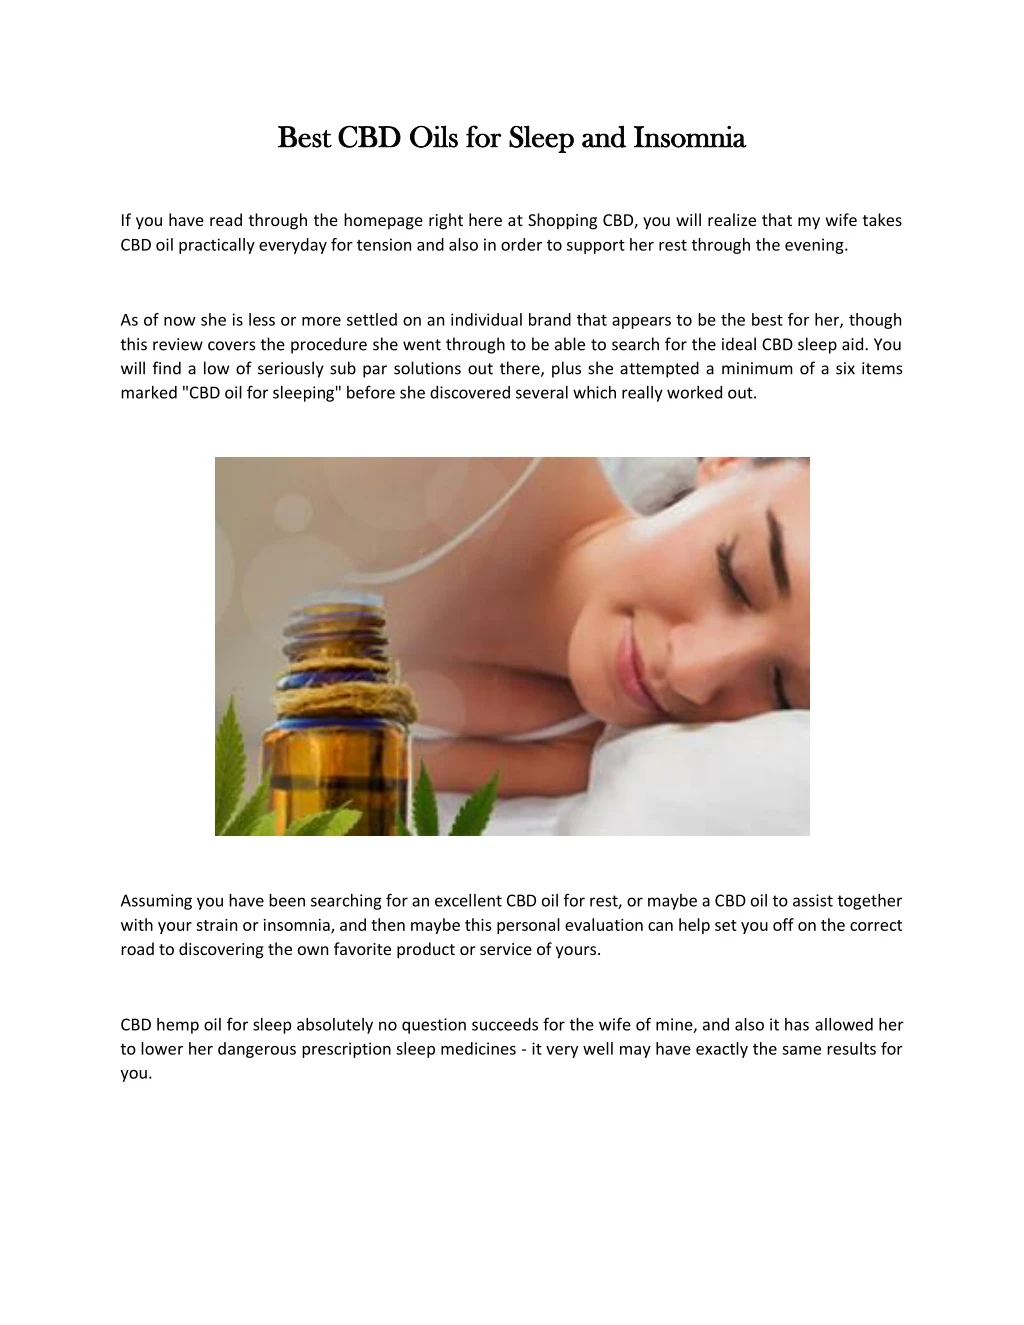 best cbd oils for sleep and insomnia best